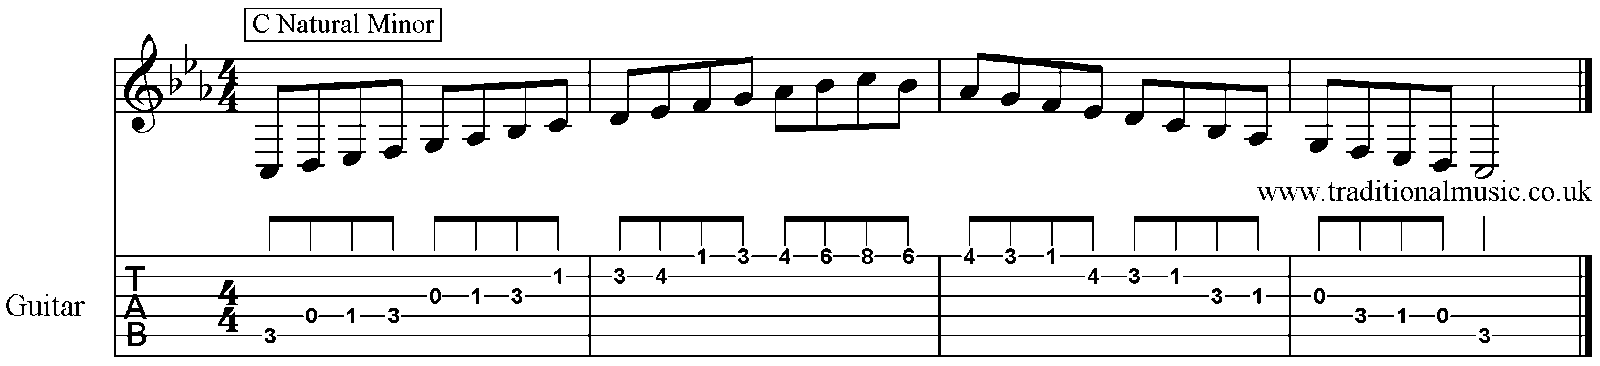 Minor Scales for Guitar C 